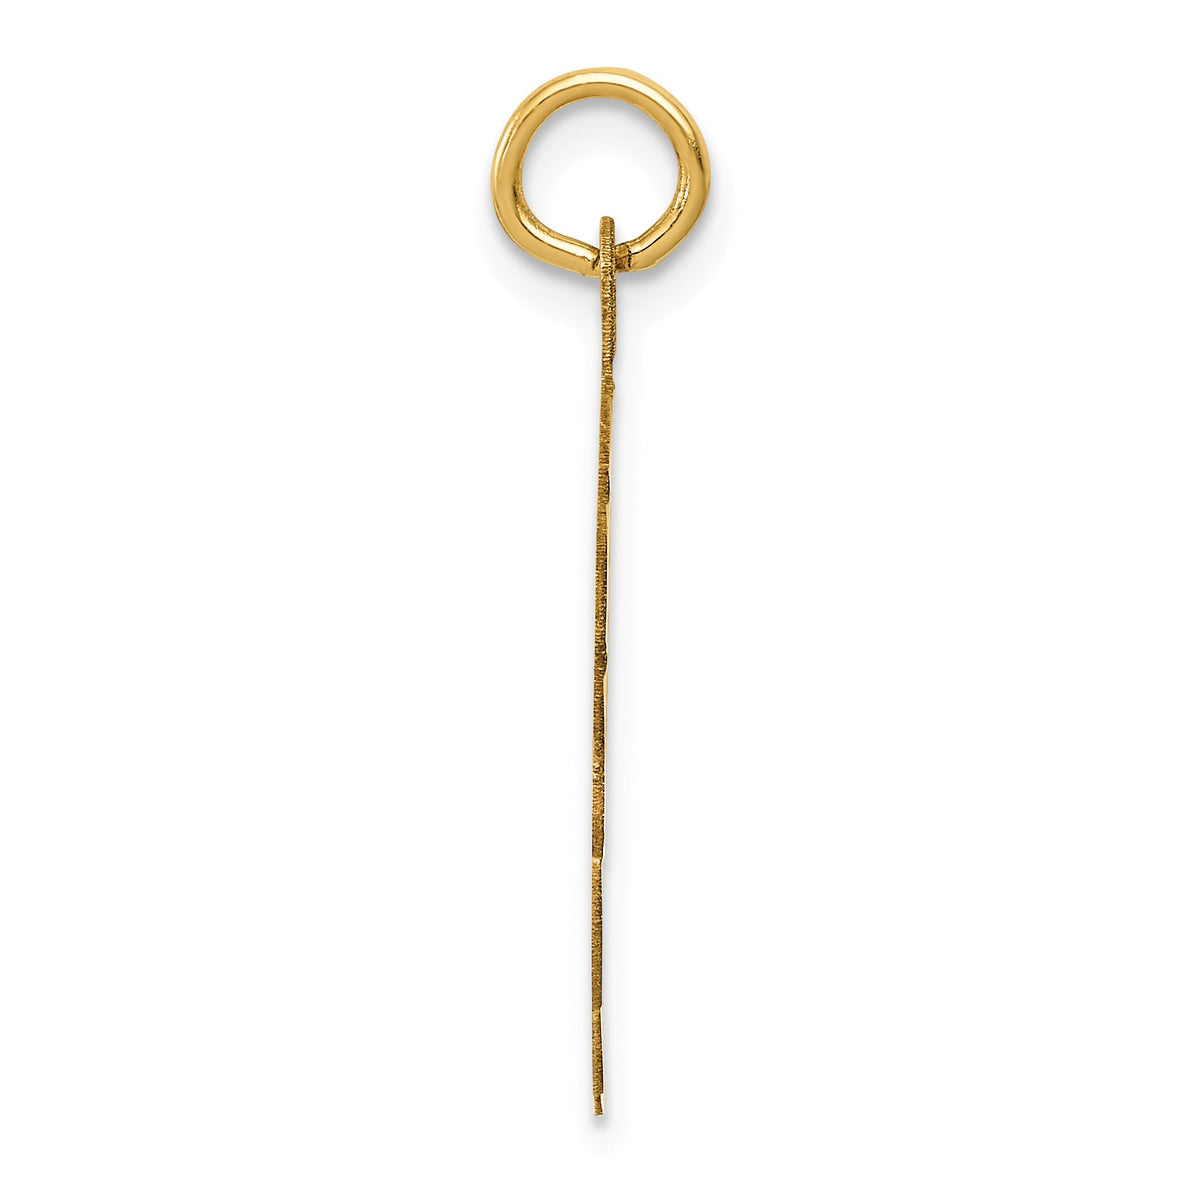 Alternate view of the 14k Yellow Gold Wrestling Disc Pendant, 20mm by The Black Bow Jewelry Co.